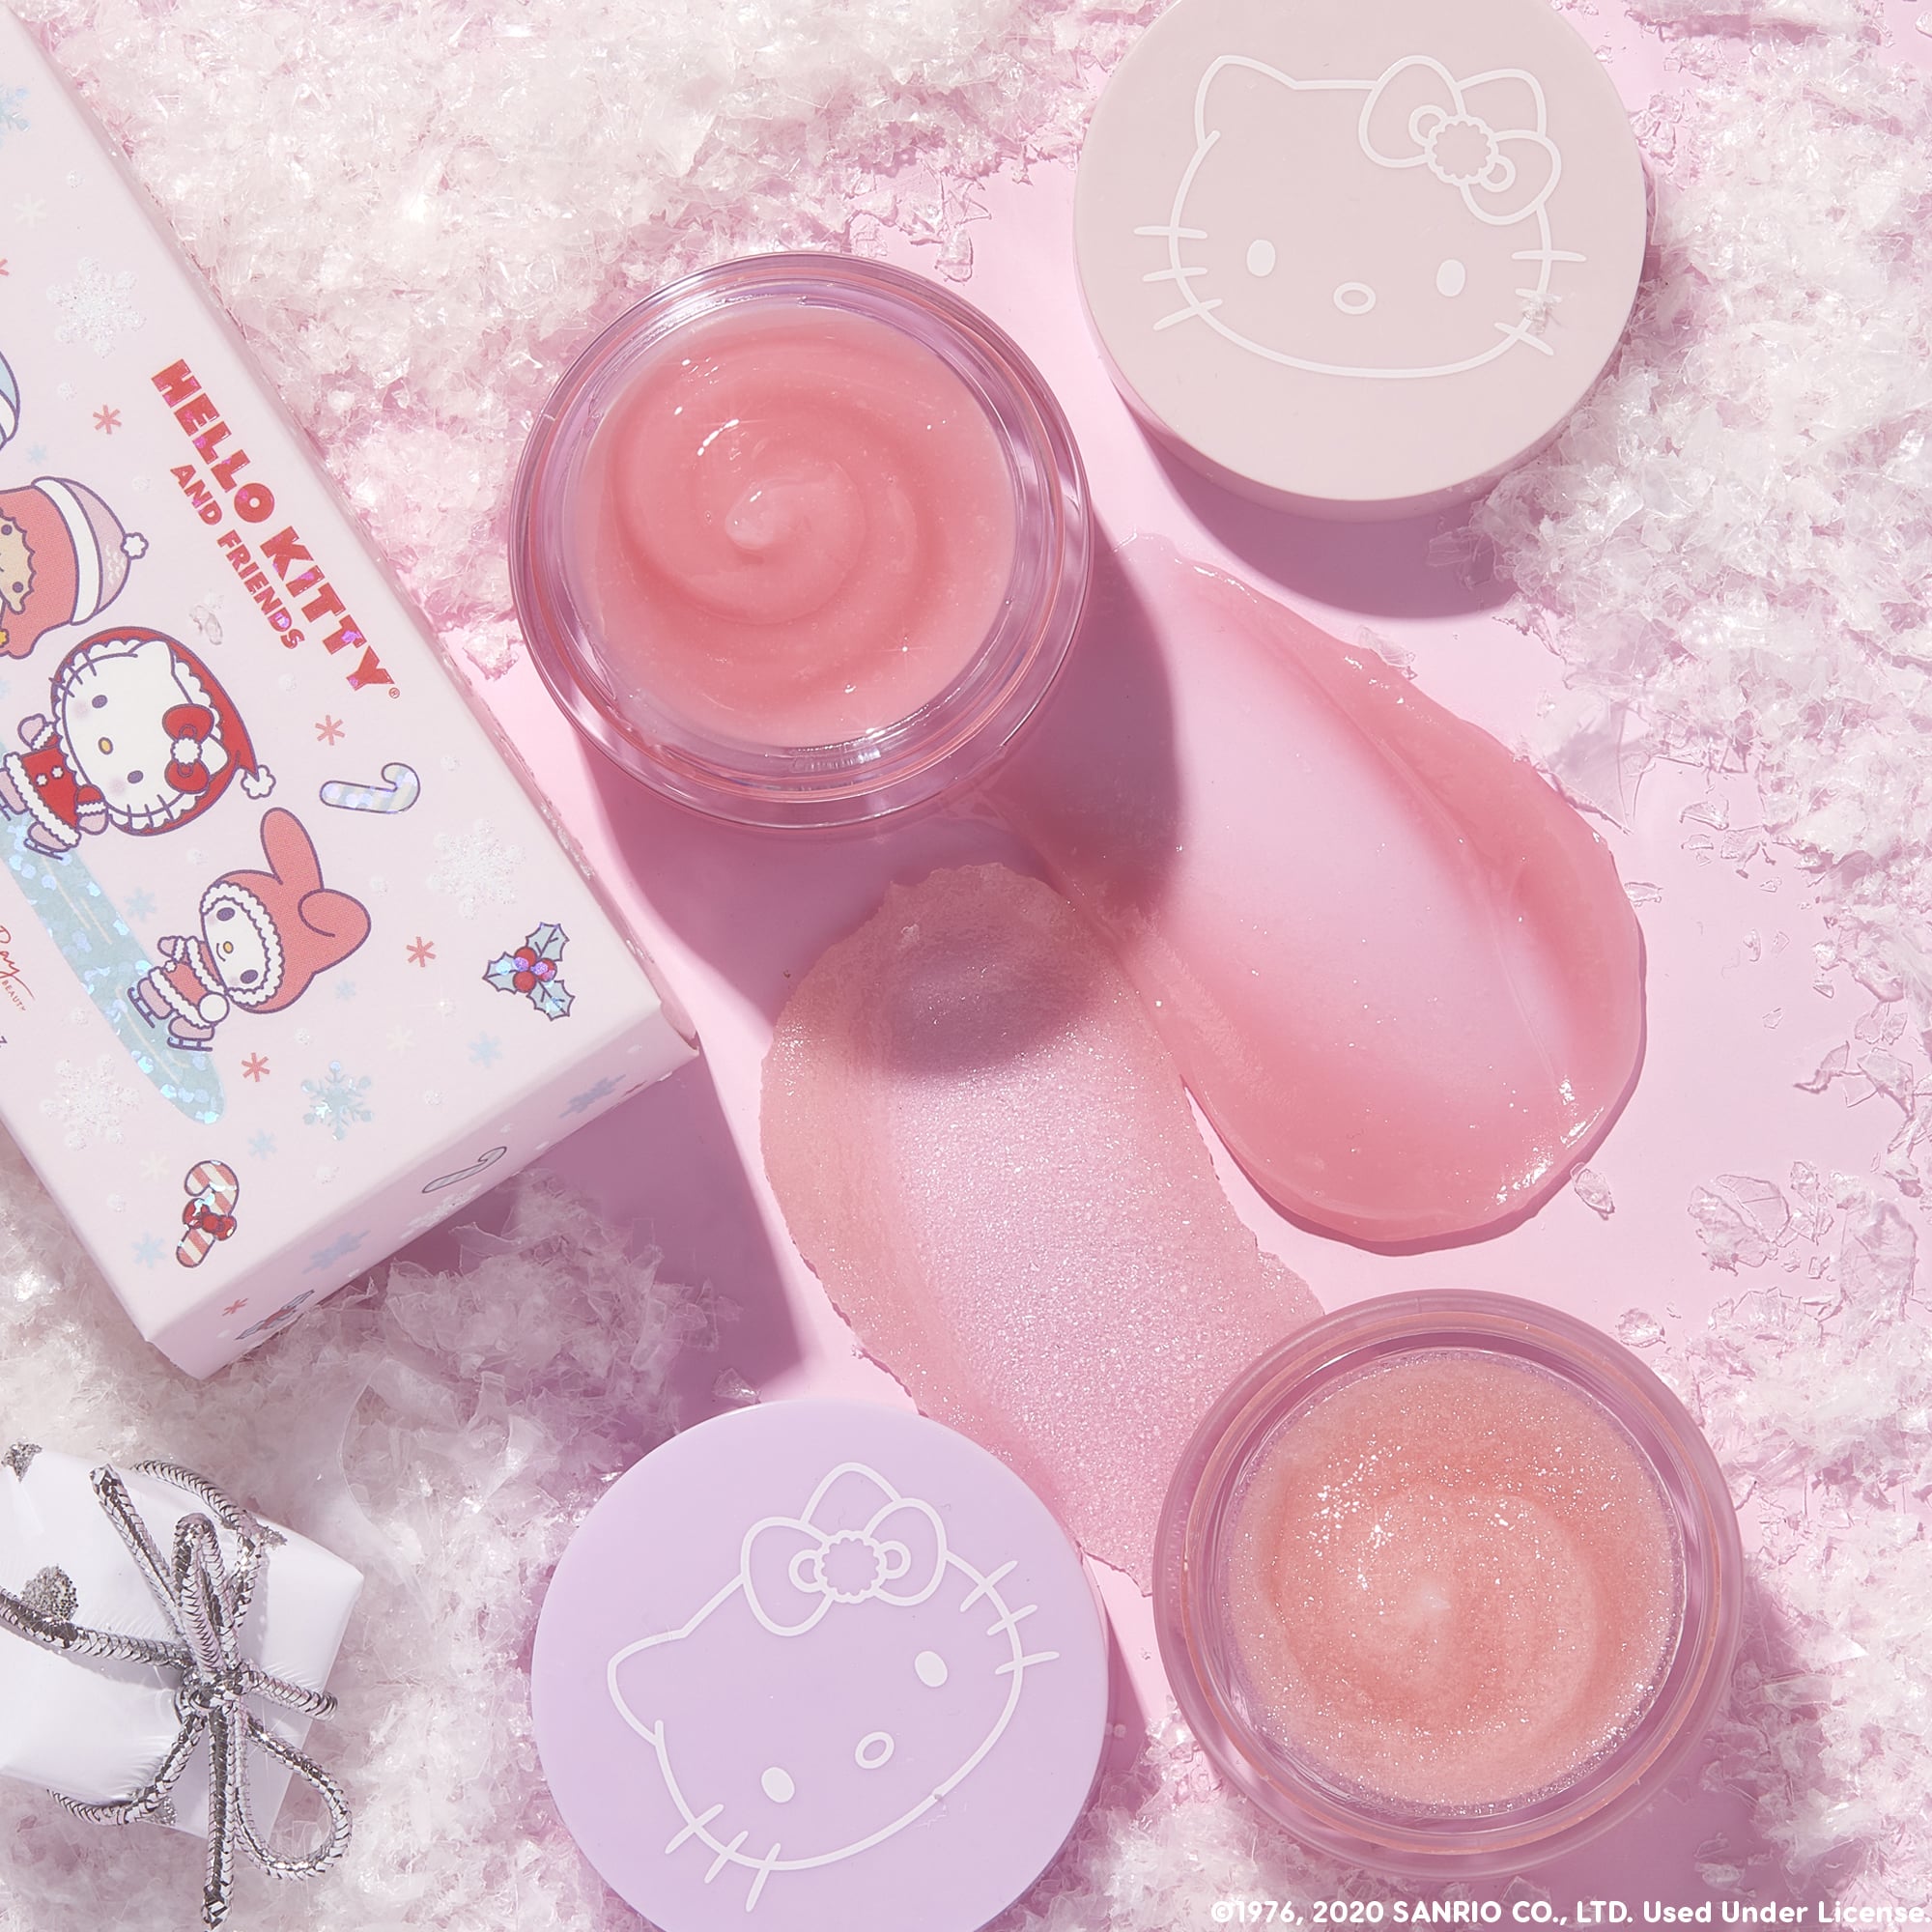 Hello Kitty Gets Pretty with Colourpop